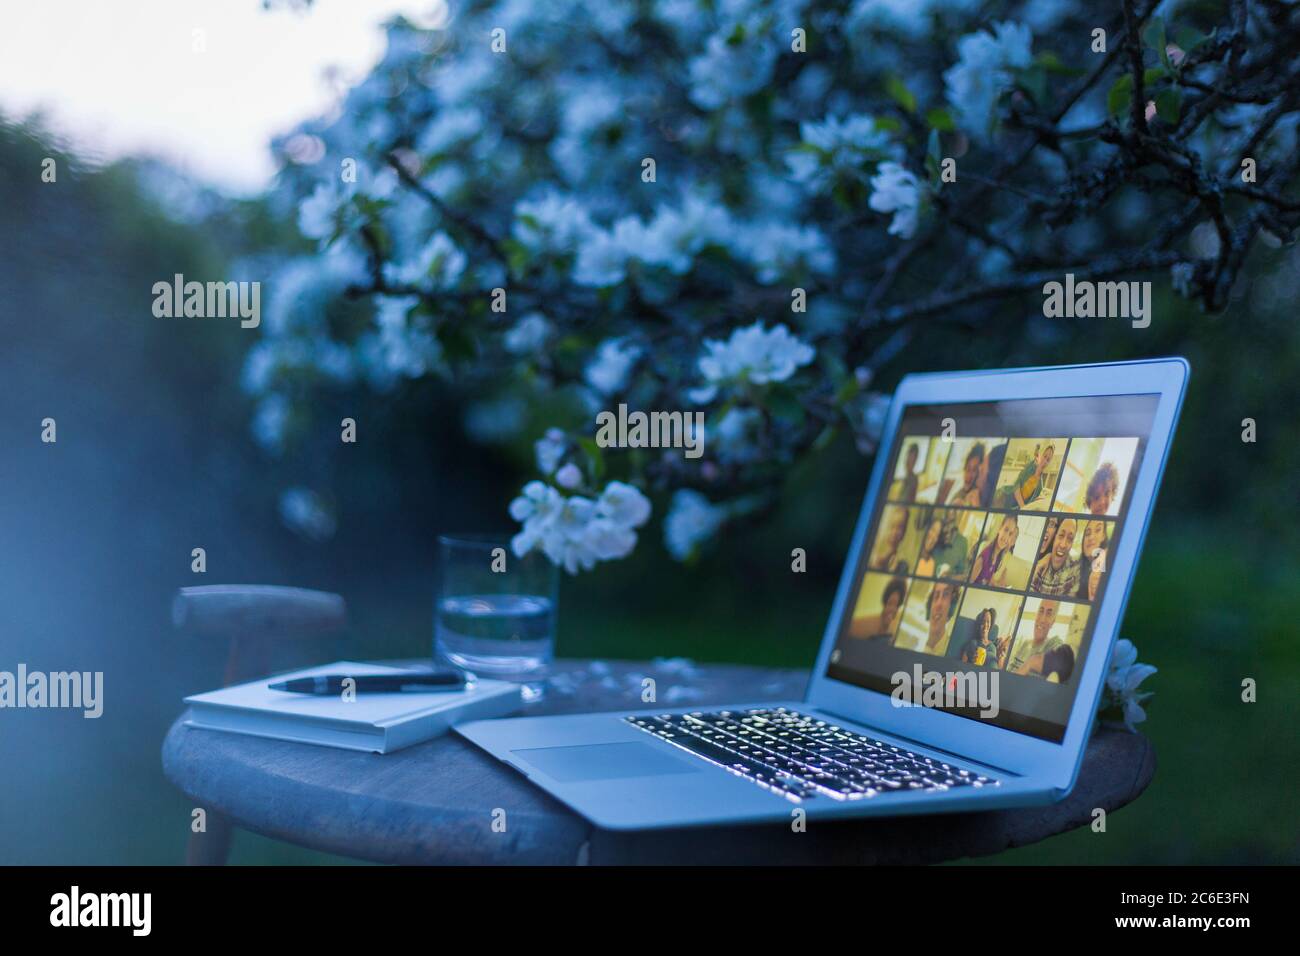 Friends video chatting on laptop screen in garden at dusk Stock Photo